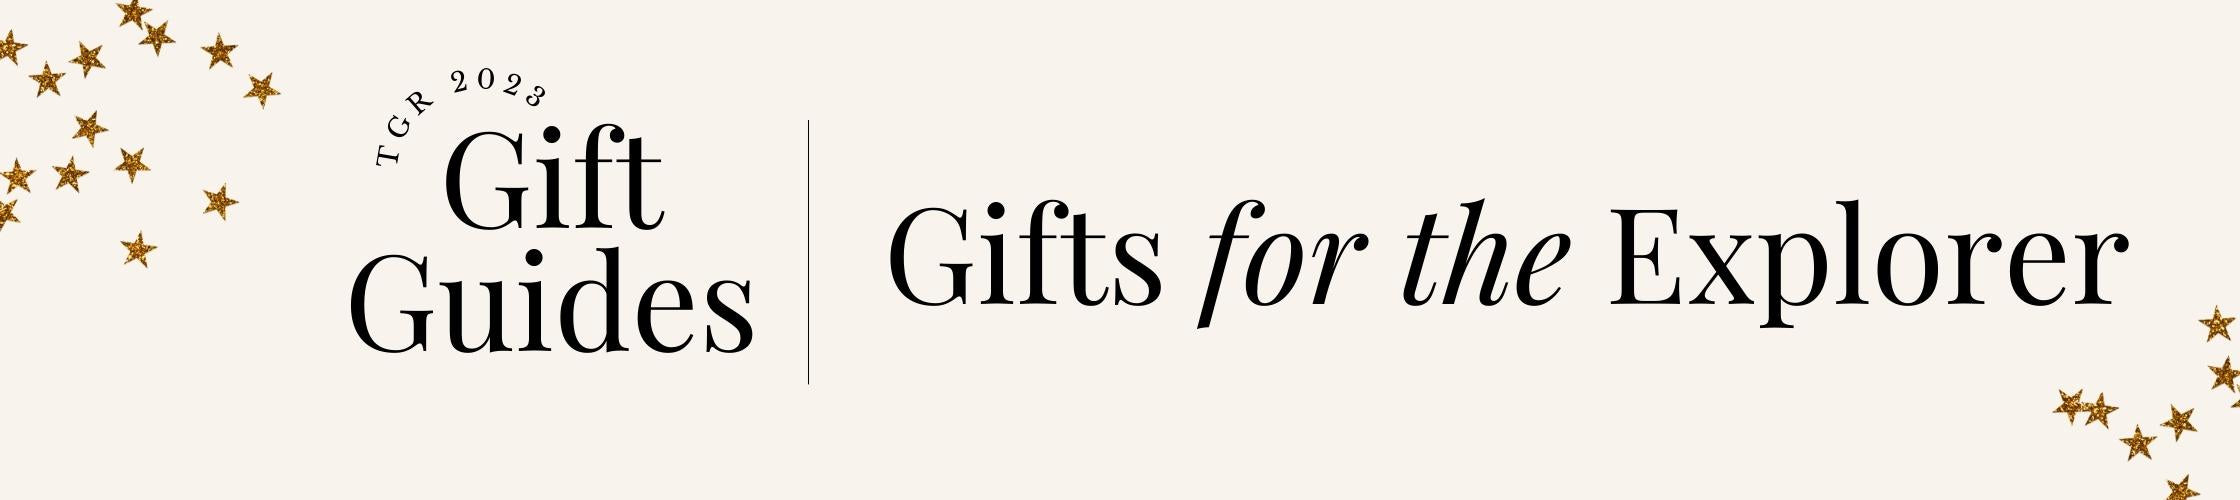 2023 Holiday Gift Guides: Gifts for the Explorer